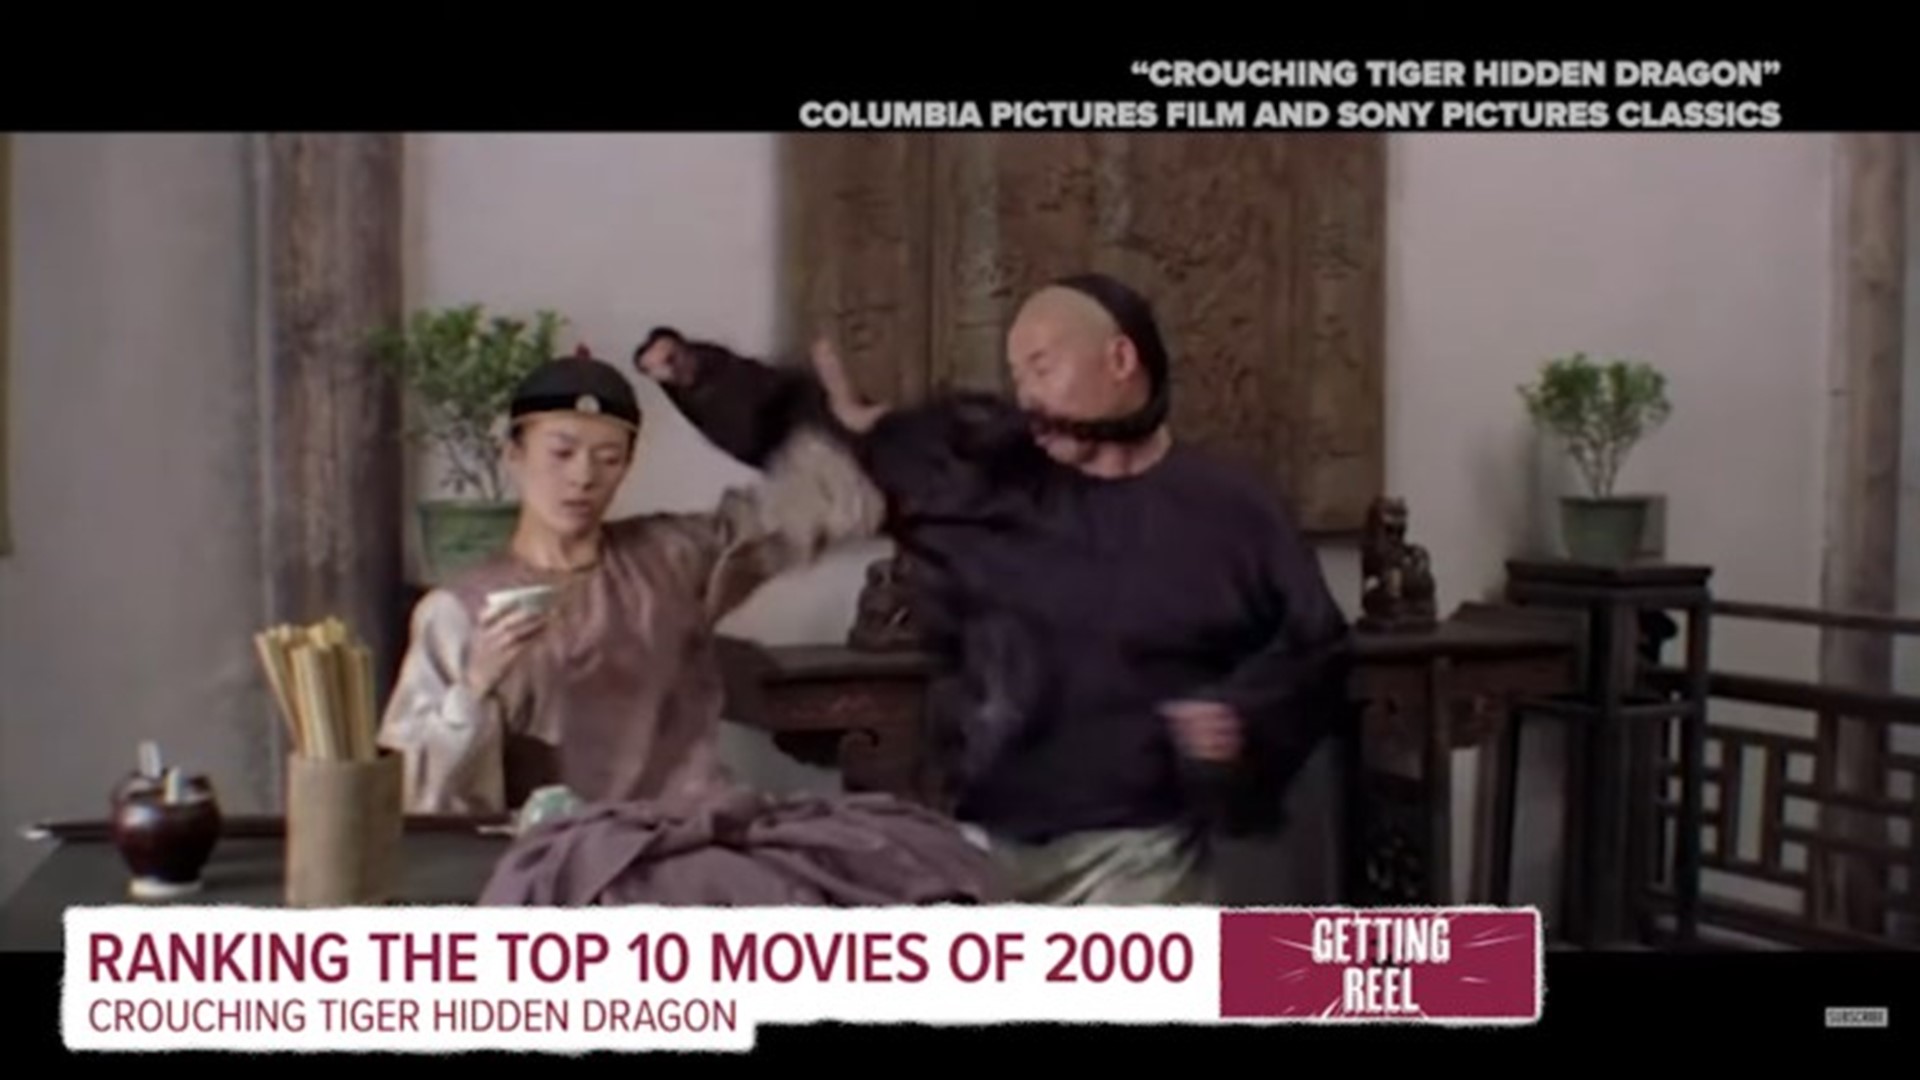 Michael, JD and Zach of the Getting Reel team at KTHV break down the Top 10 movies of 2000.